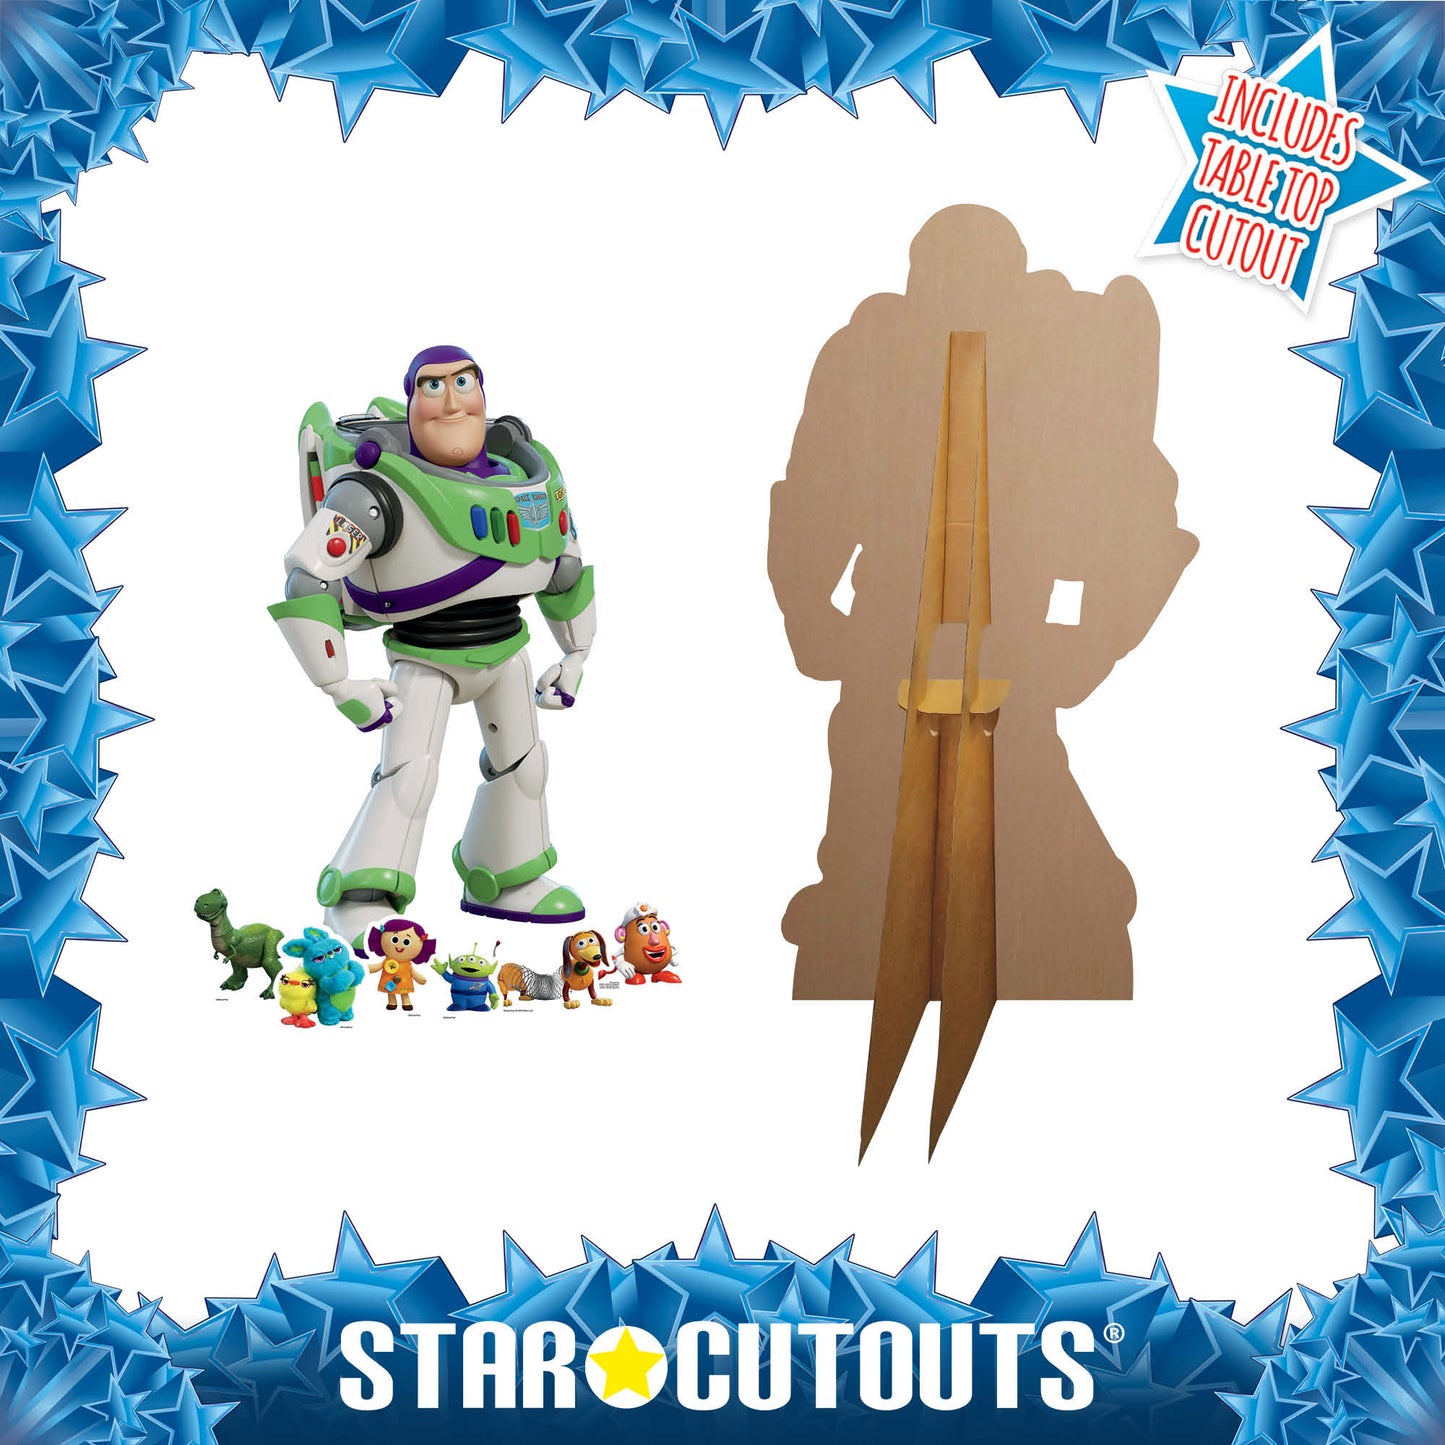 Buzz Lightyear Toy Story Cardboard Cutout Party Decorations With Six Mini Party Decorations